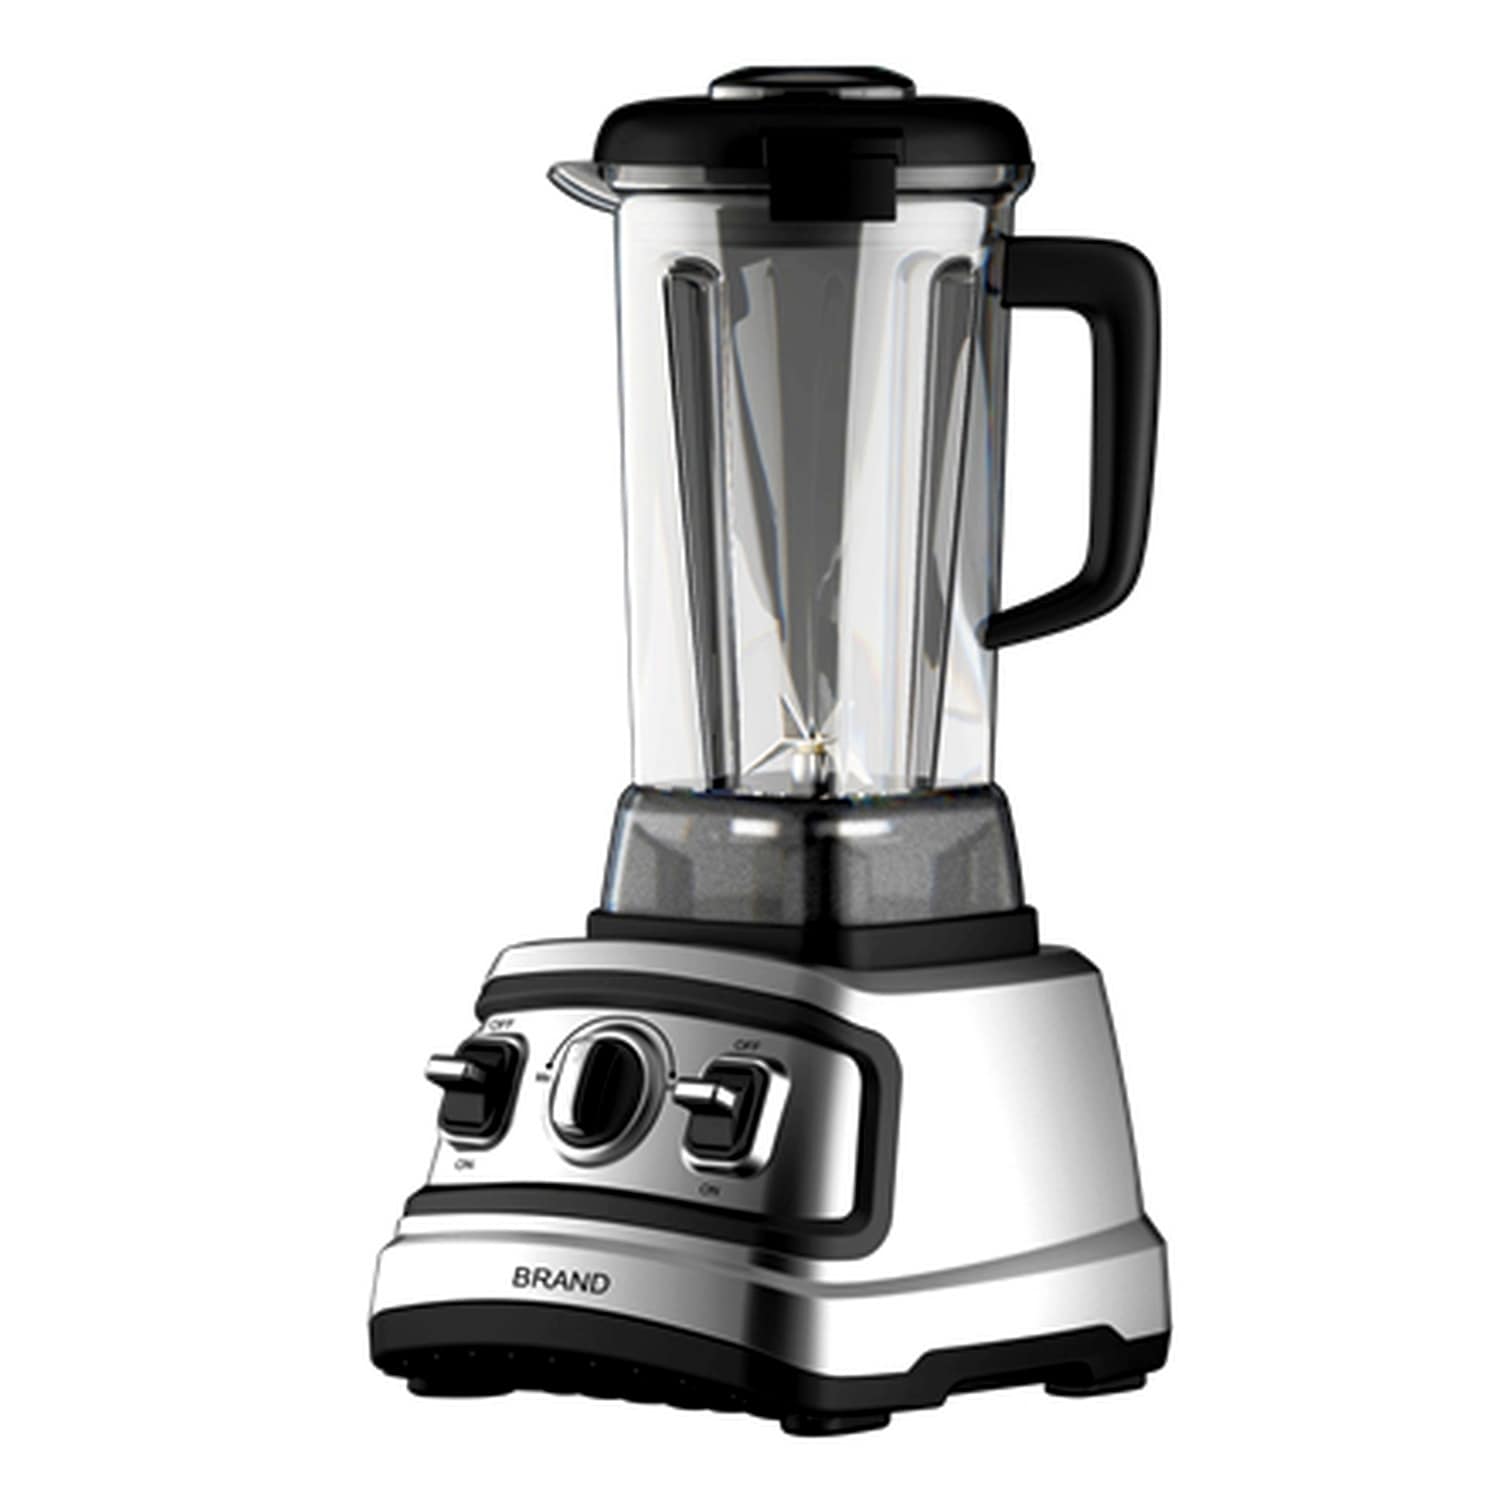 https://ak1.ostkcdn.com/images/products/is/images/direct/f98efce4cac1581edb19f8b551923385dc6cd9f7/Ecohouzng-High-speed-quiet-blender.jpg